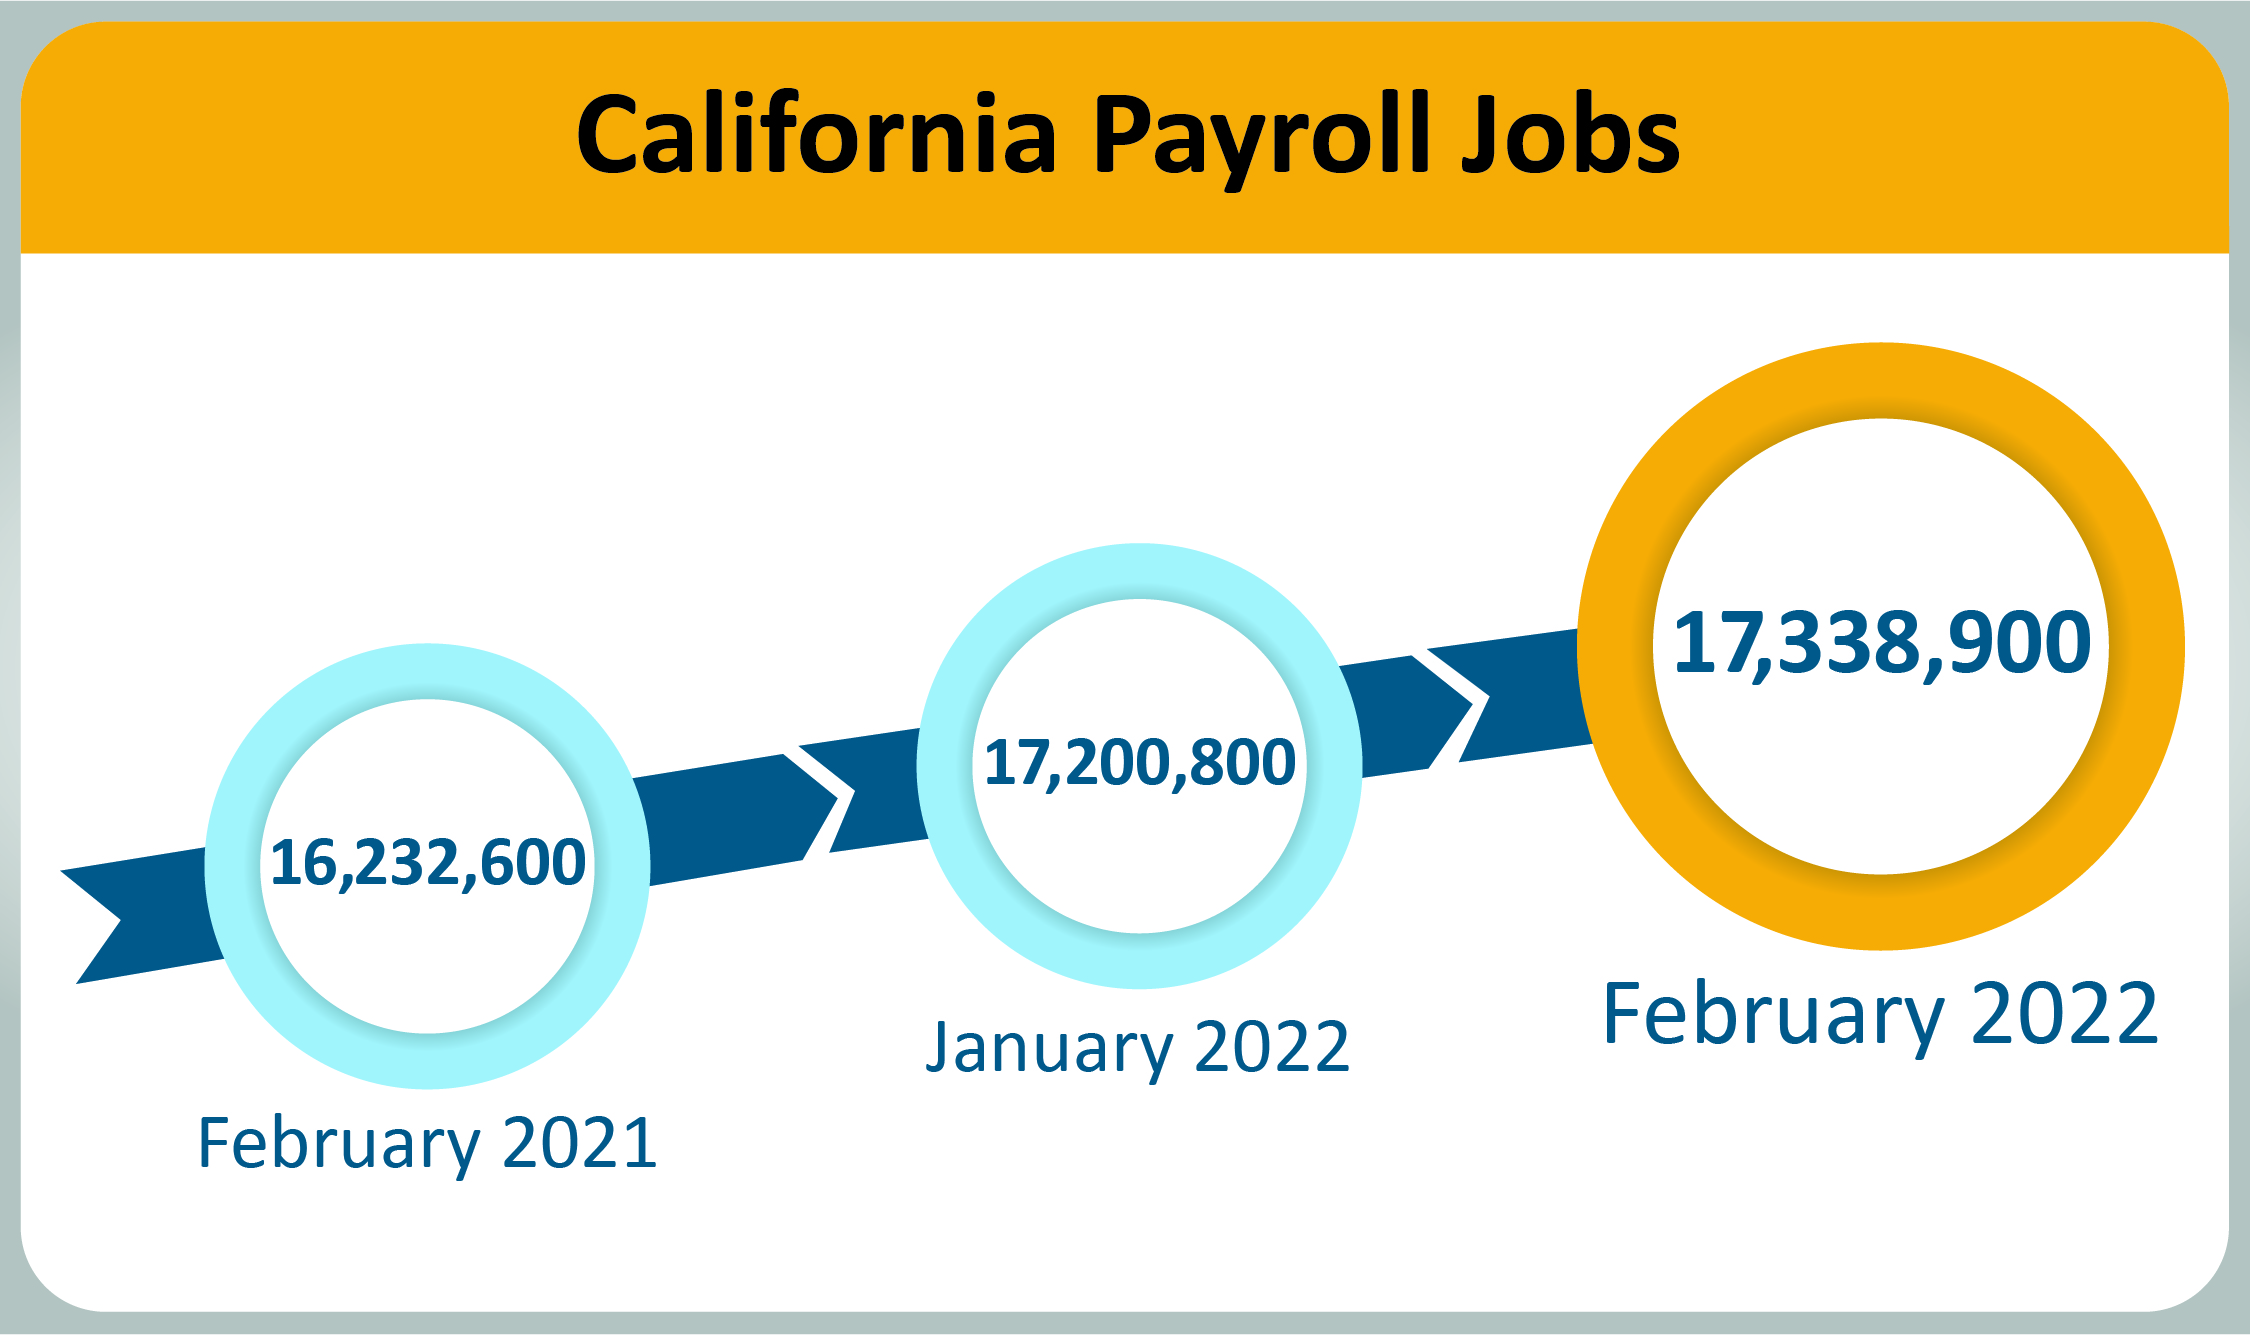 California payroll jobs totaled 17,338,900 as of February 2022.